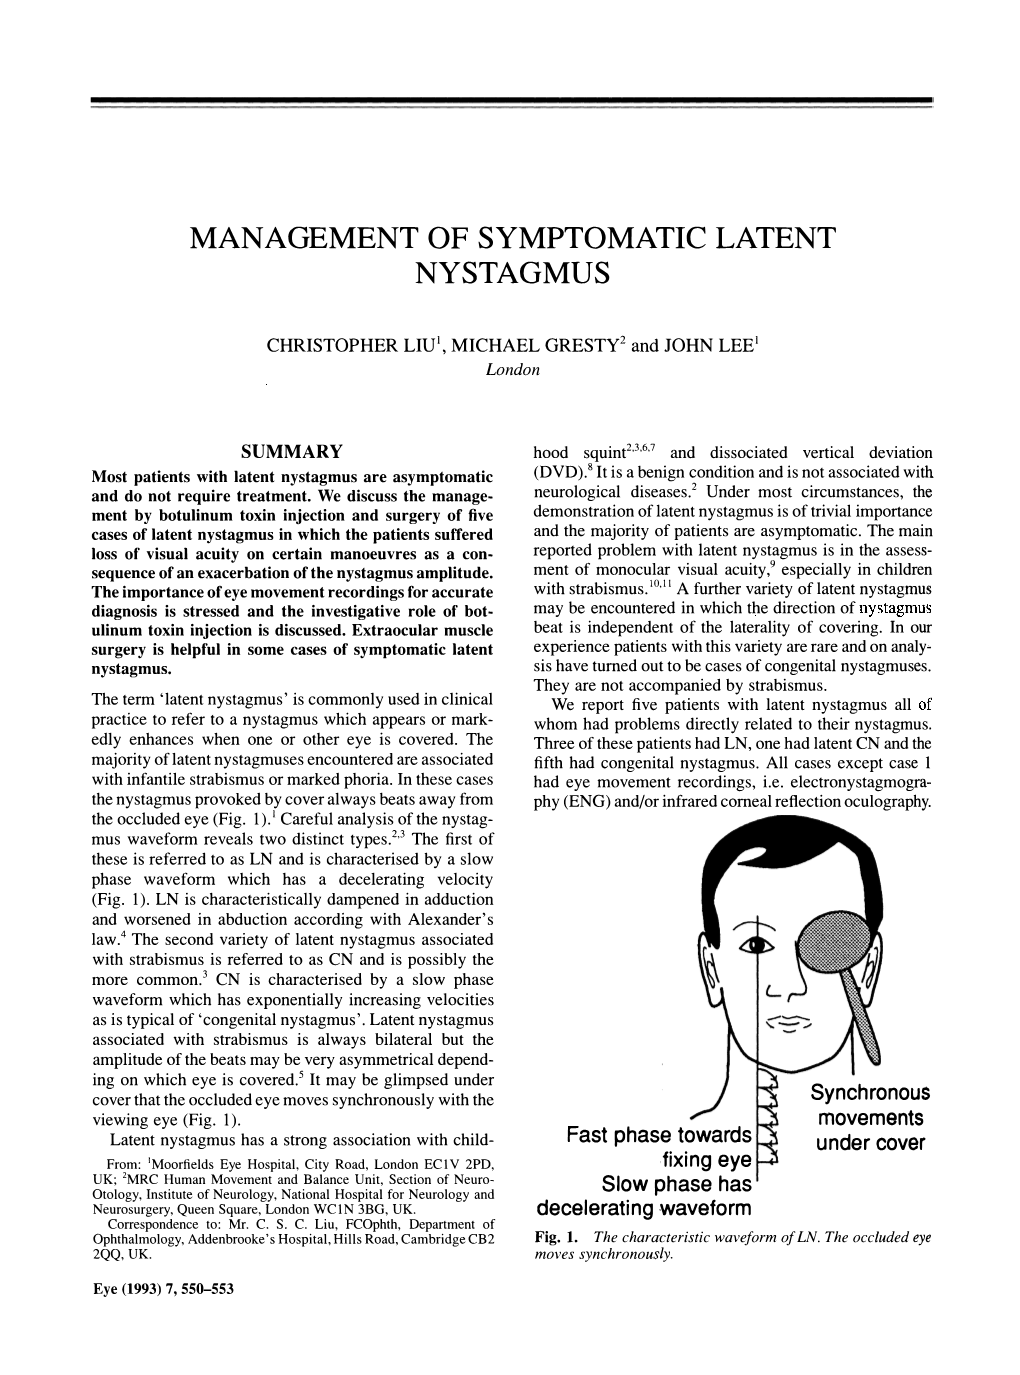 Management of Symptomatic Latent Nystagmus